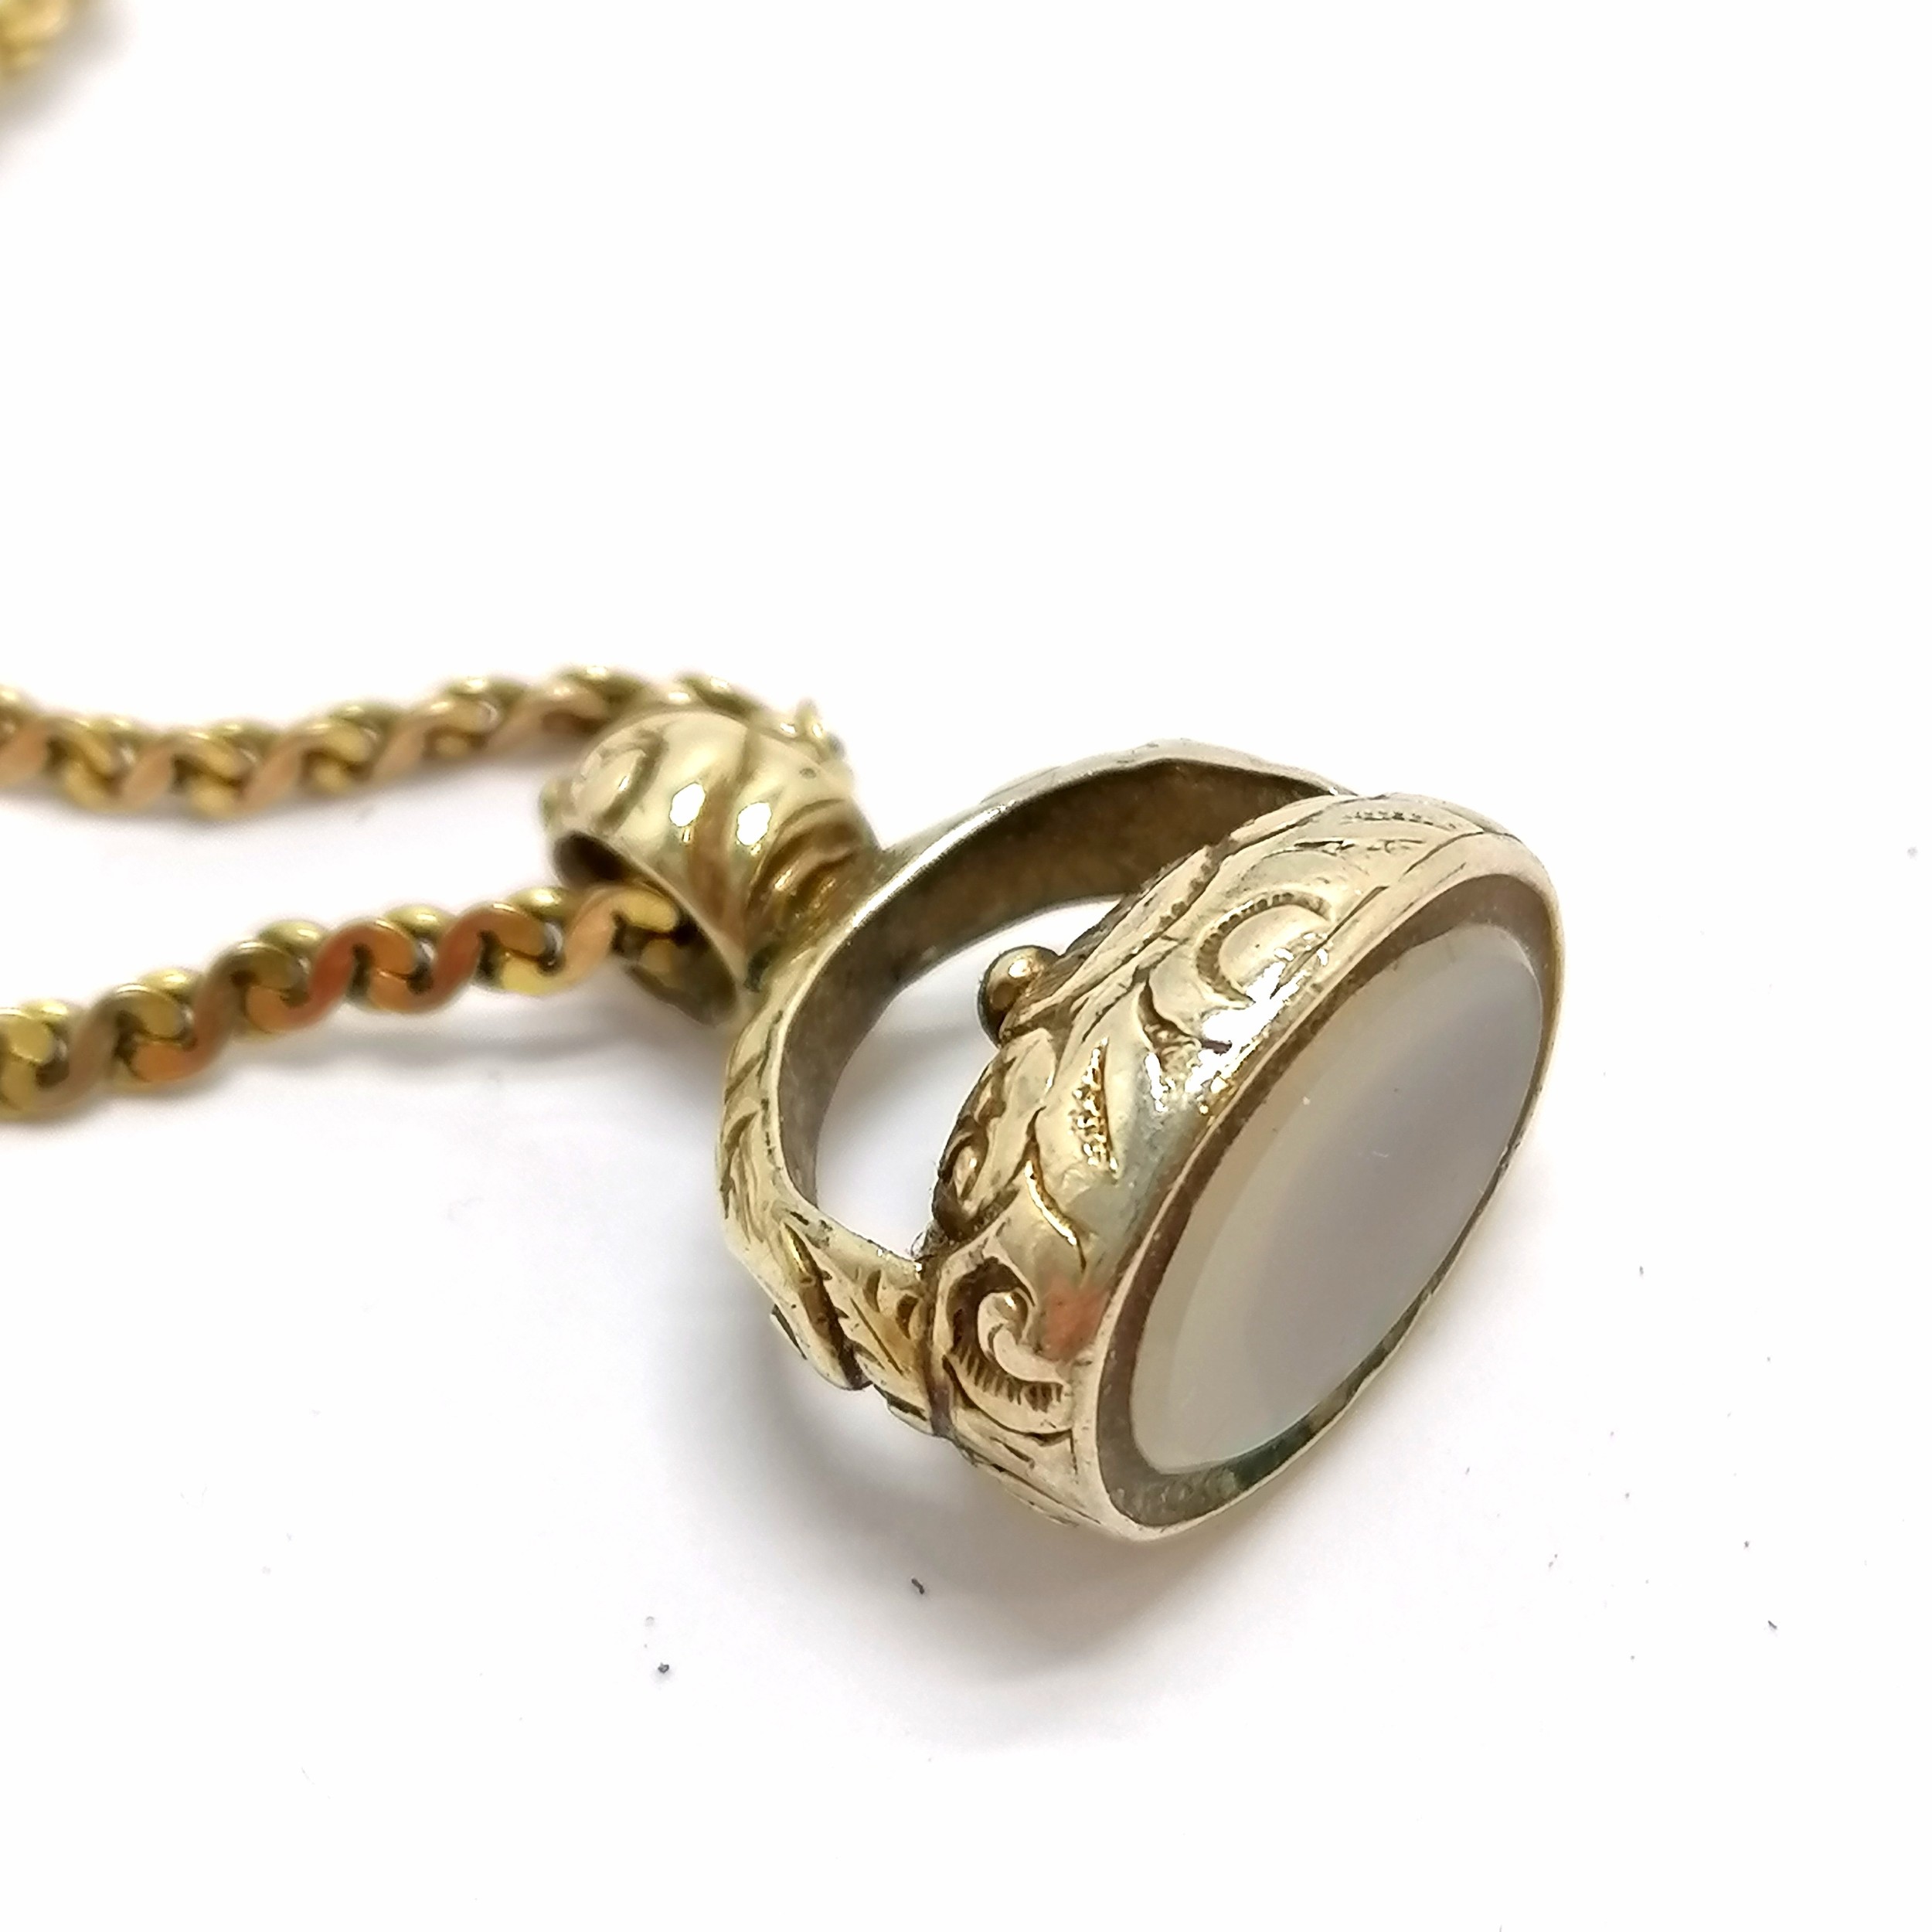 9ct hallmarked gold 42cm neckchain with antique yellow metal seal fob pendant with white agate - Image 4 of 4